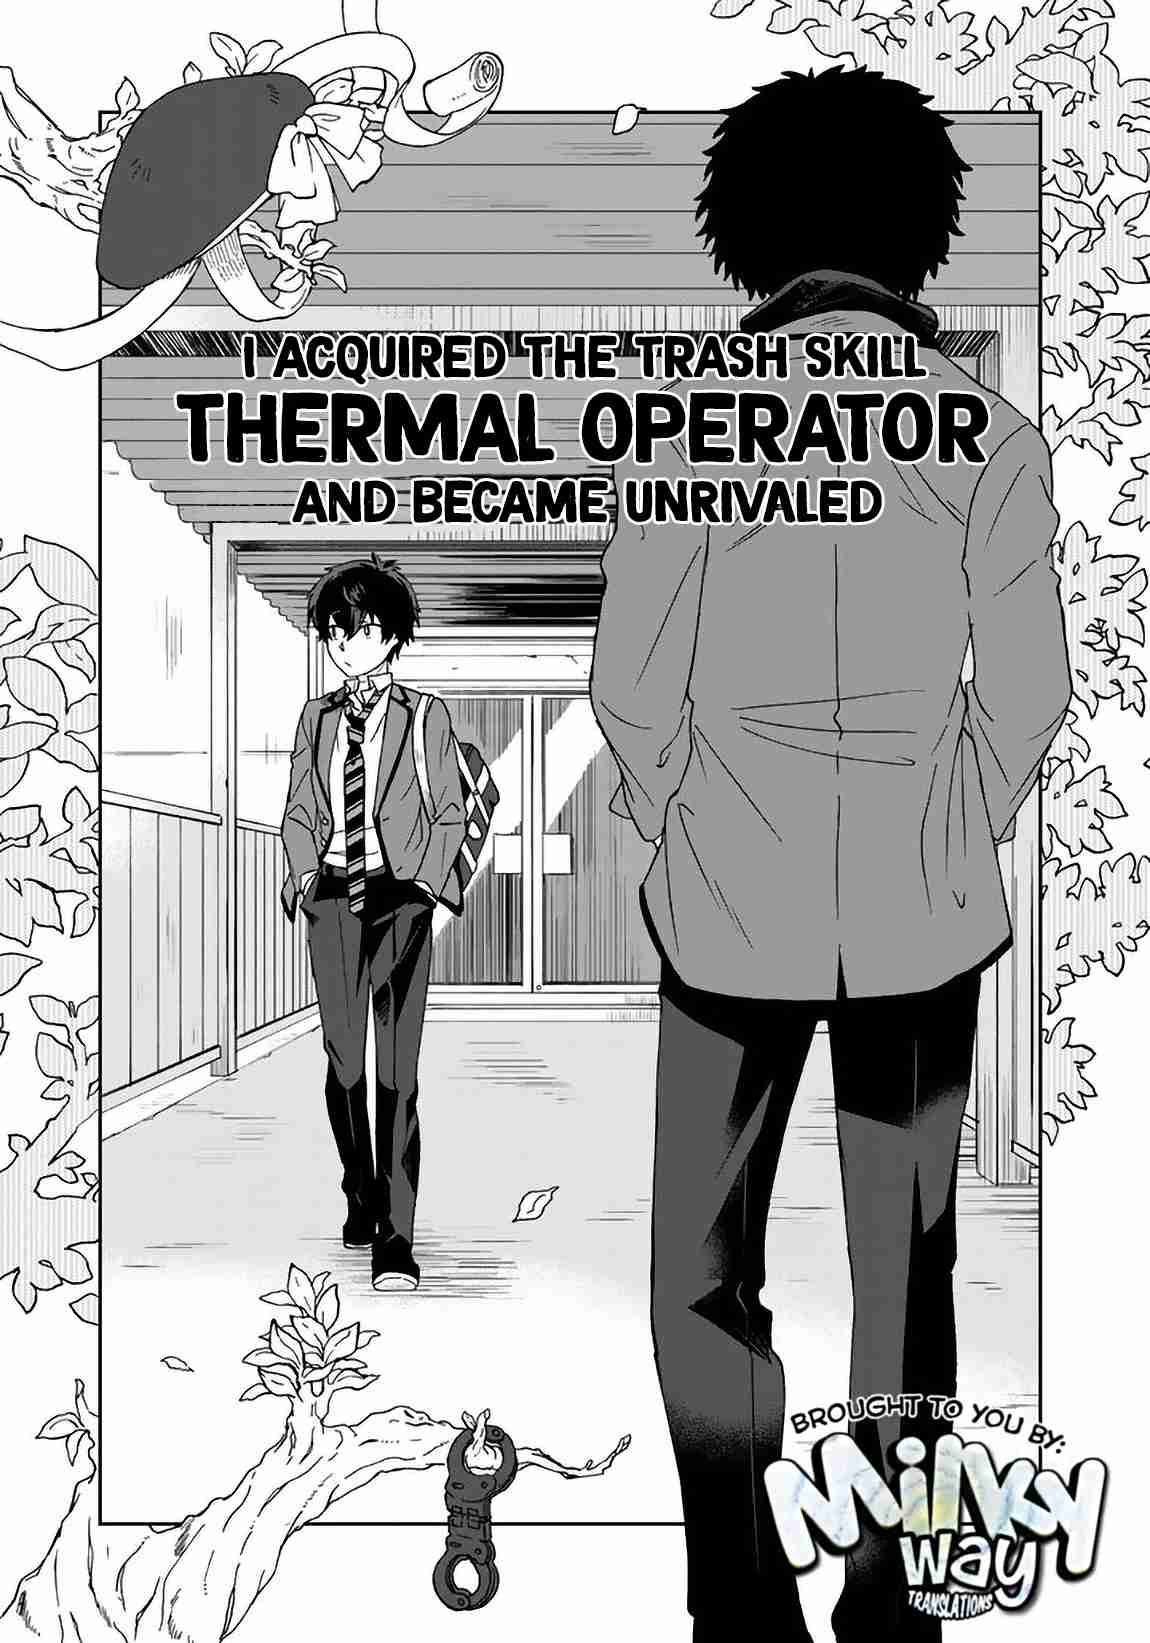 I, Who Acquired a Trash Skill 【Thermal Operator】, Became Unrivaled. Vol. 1 Ch. 5 The value of Healing Power